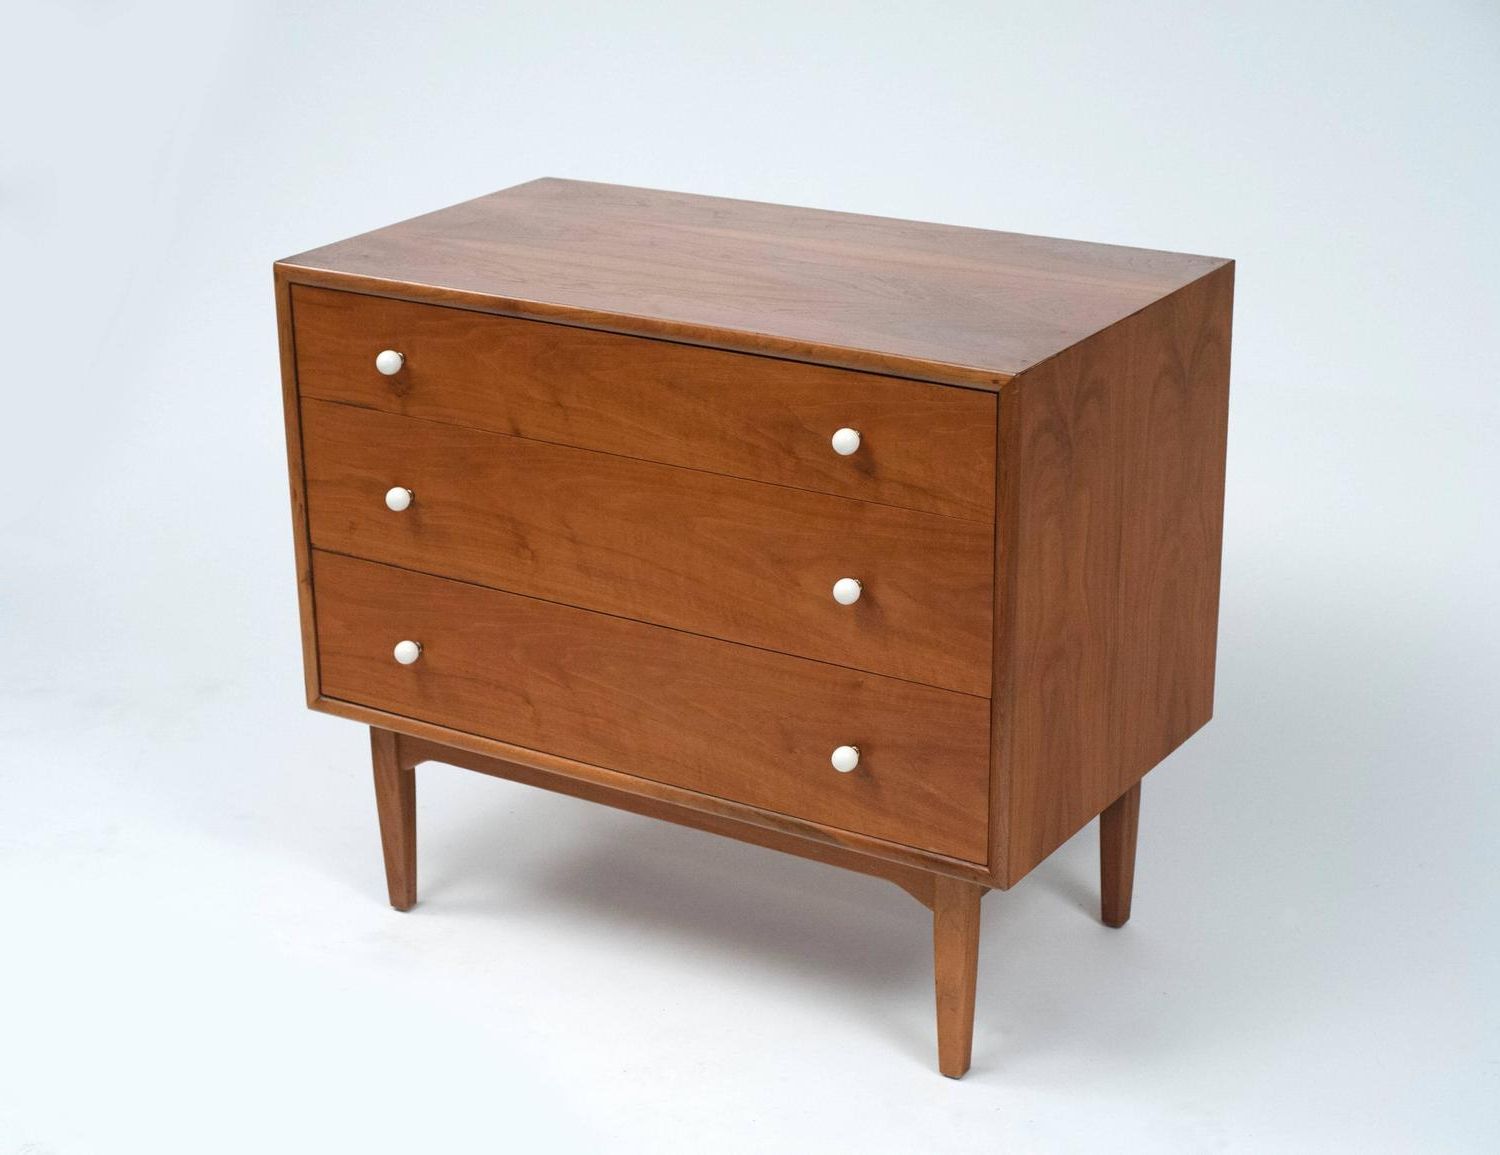 Newest Drexel Dresser From The Declaration Line At 1stdibs With Regard To Drexler  (View 2 of 5)